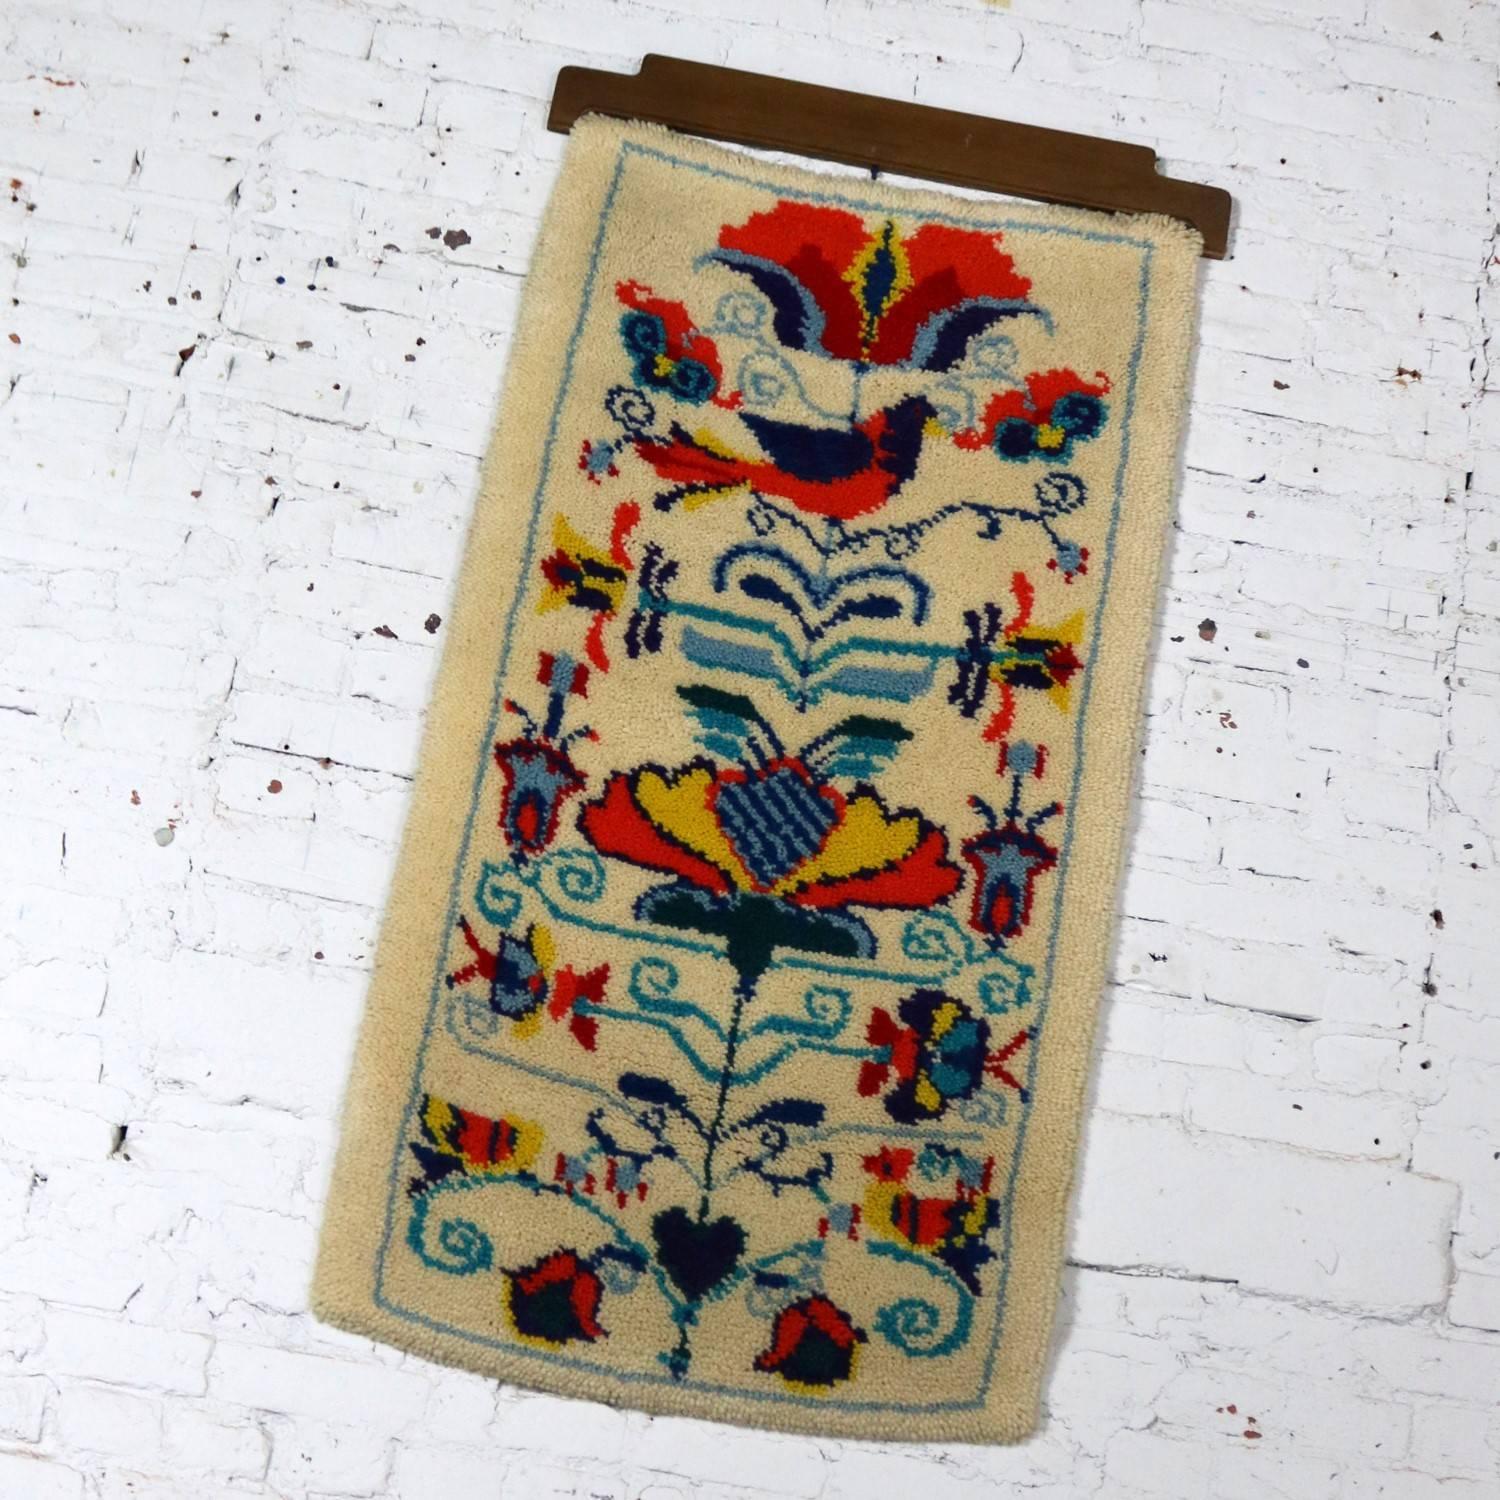 Handsome traditional motif Scandinavian vintage midcentury hooked rug wall hanging with wood hanging bracket. It is in wonderful condition and ready to hang, circa 1950s-1960s.

Bold and bright and beautiful! This vintage Scandinavian wall hanging